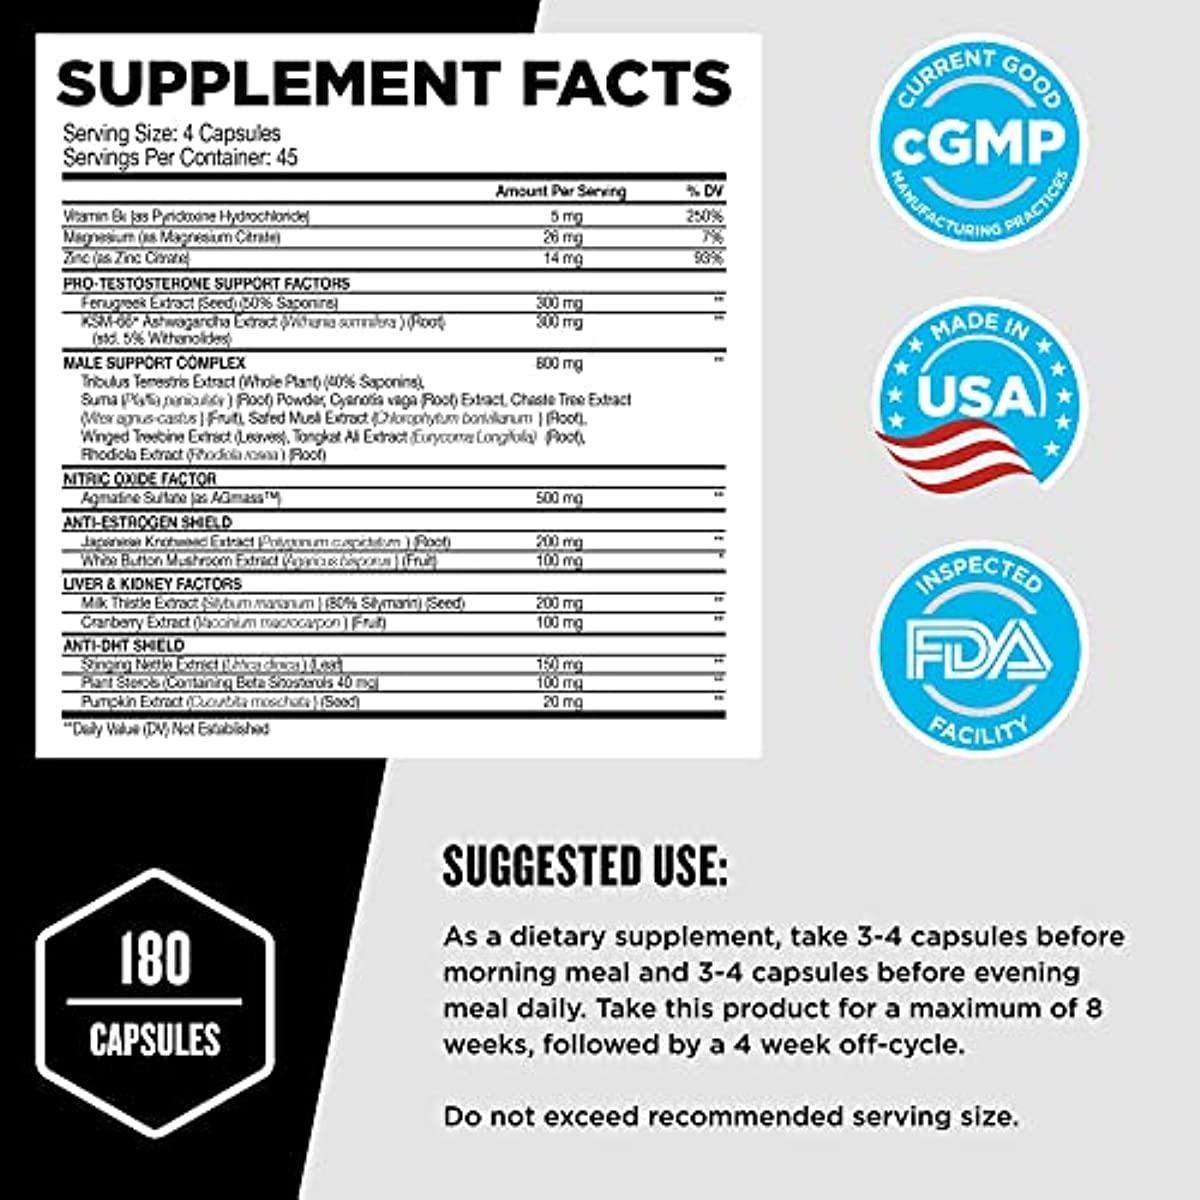 Beast Sports Nutrition Super Test - 180 Capsules - Maximize Strength, Faster Recovery & Increase Performance - 45 Servings